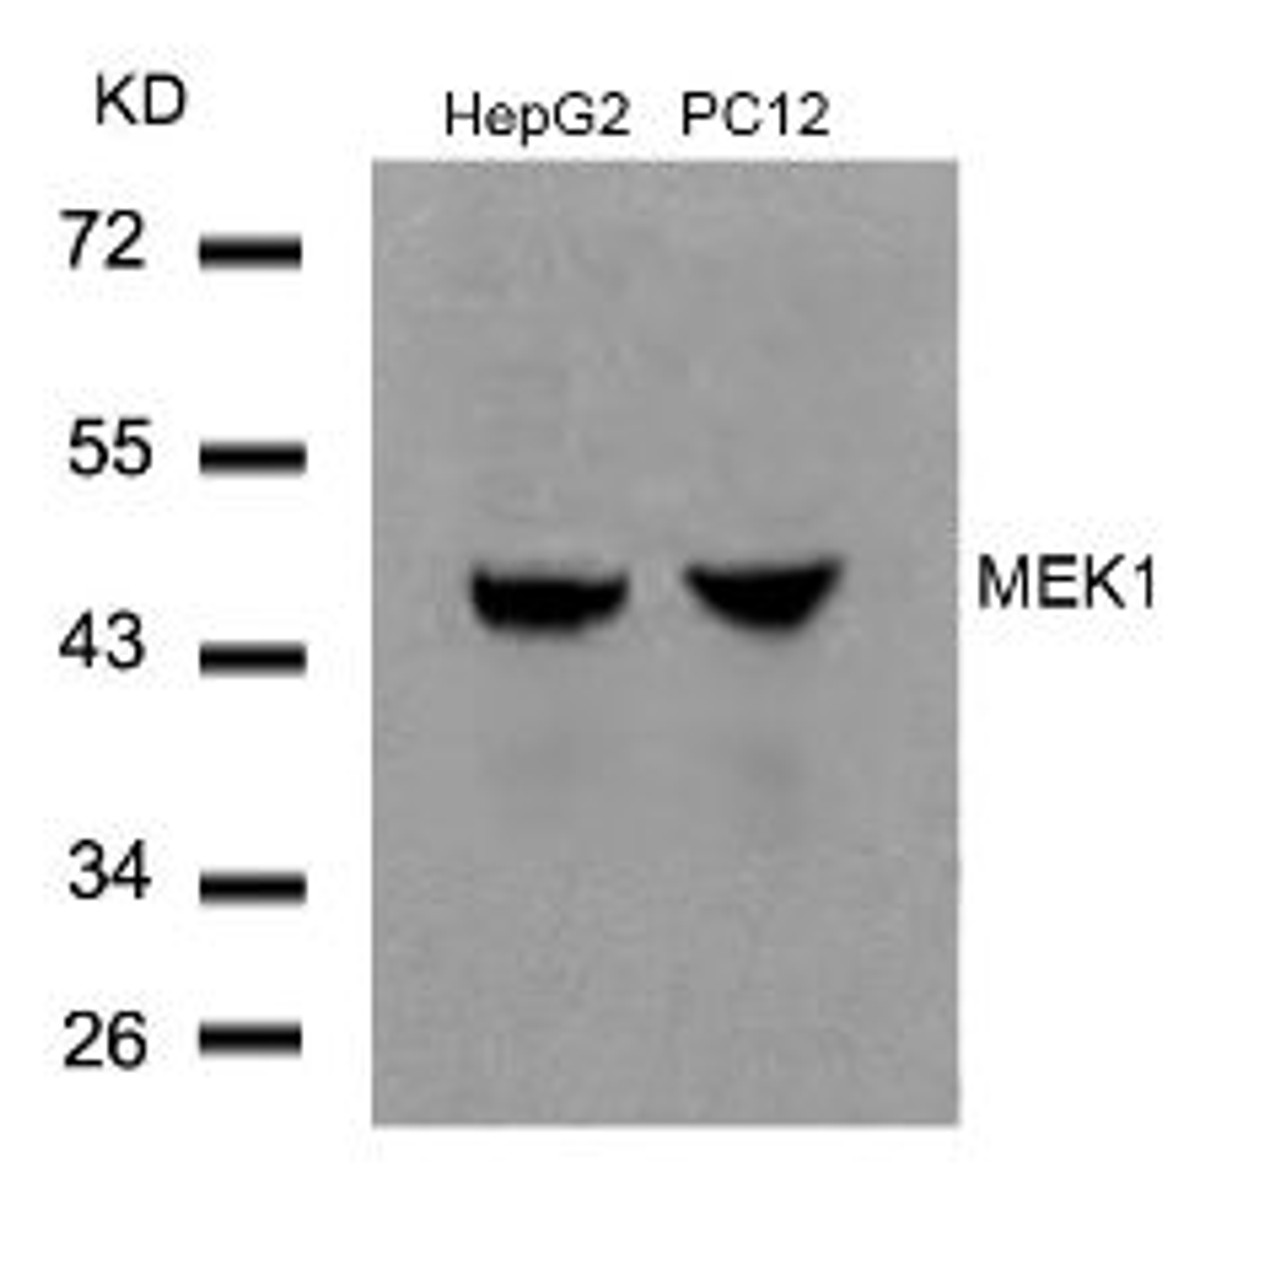 Western blot analysis of lysed extracts from HepG2 and PC12 cells using MEK1 (Ab-291) .